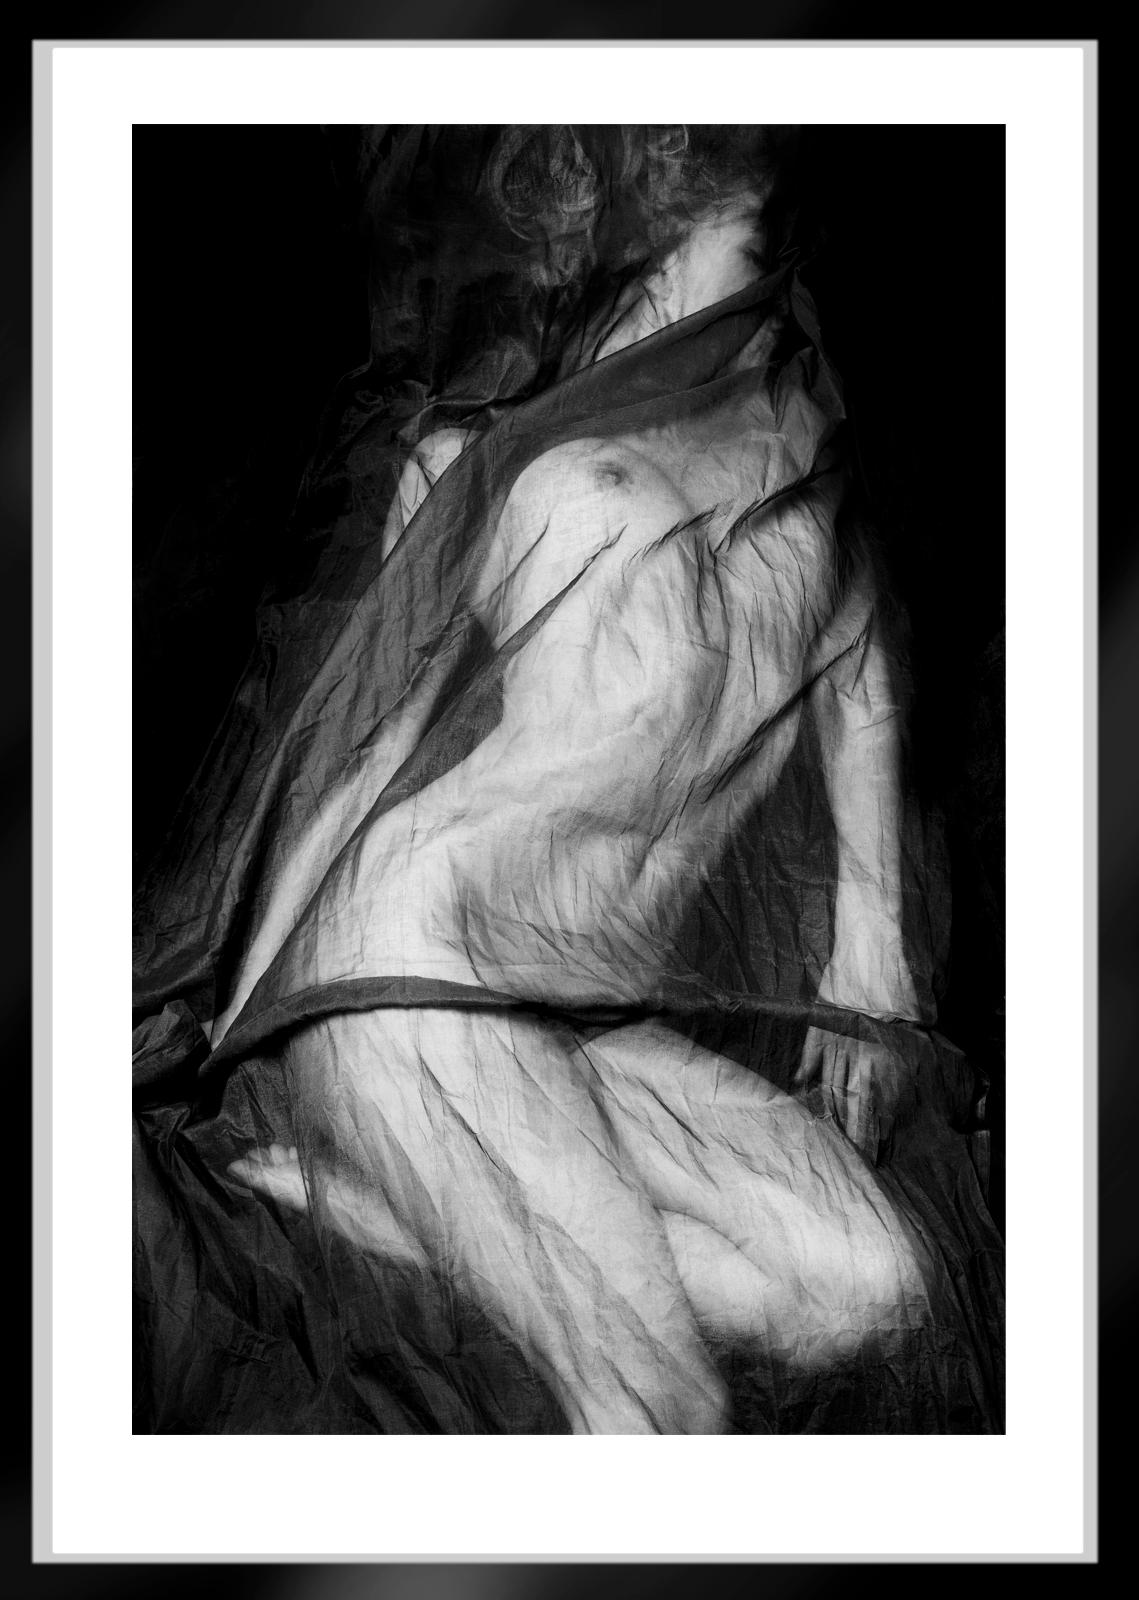 Charlotte  - Signed limited edition archival pigment print, Edition of 5
This is an Archival Pigment print on fiber based paper ( Hahnemühle Photo Rag® Baryta 315 gsm , Acid- and lignin-free, Museum quality for highest age resistance and a popular